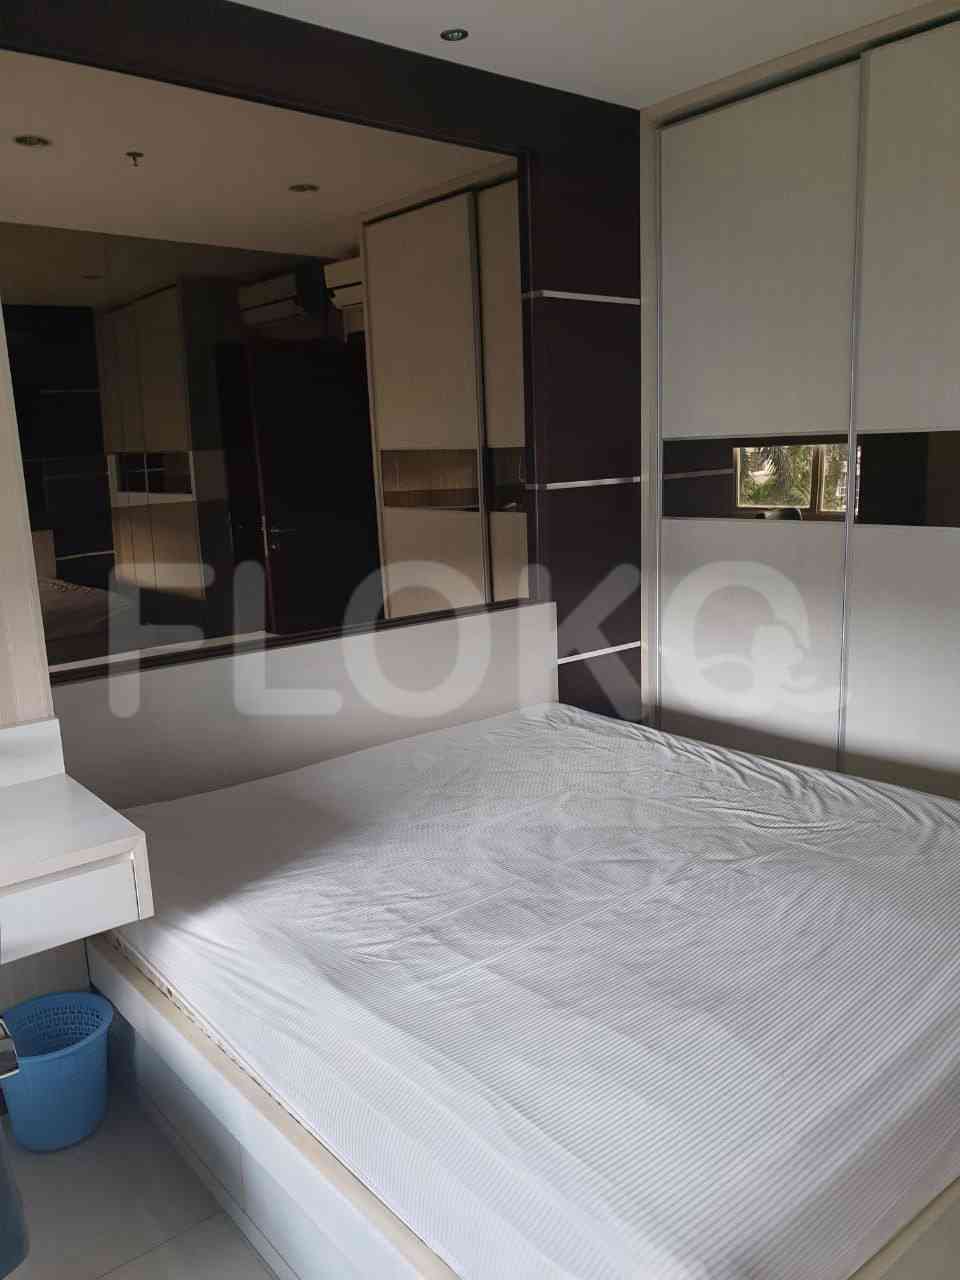 2 Bedroom on 8th Floor for Rent in Thamrin Residence Apartment - fth05c 1